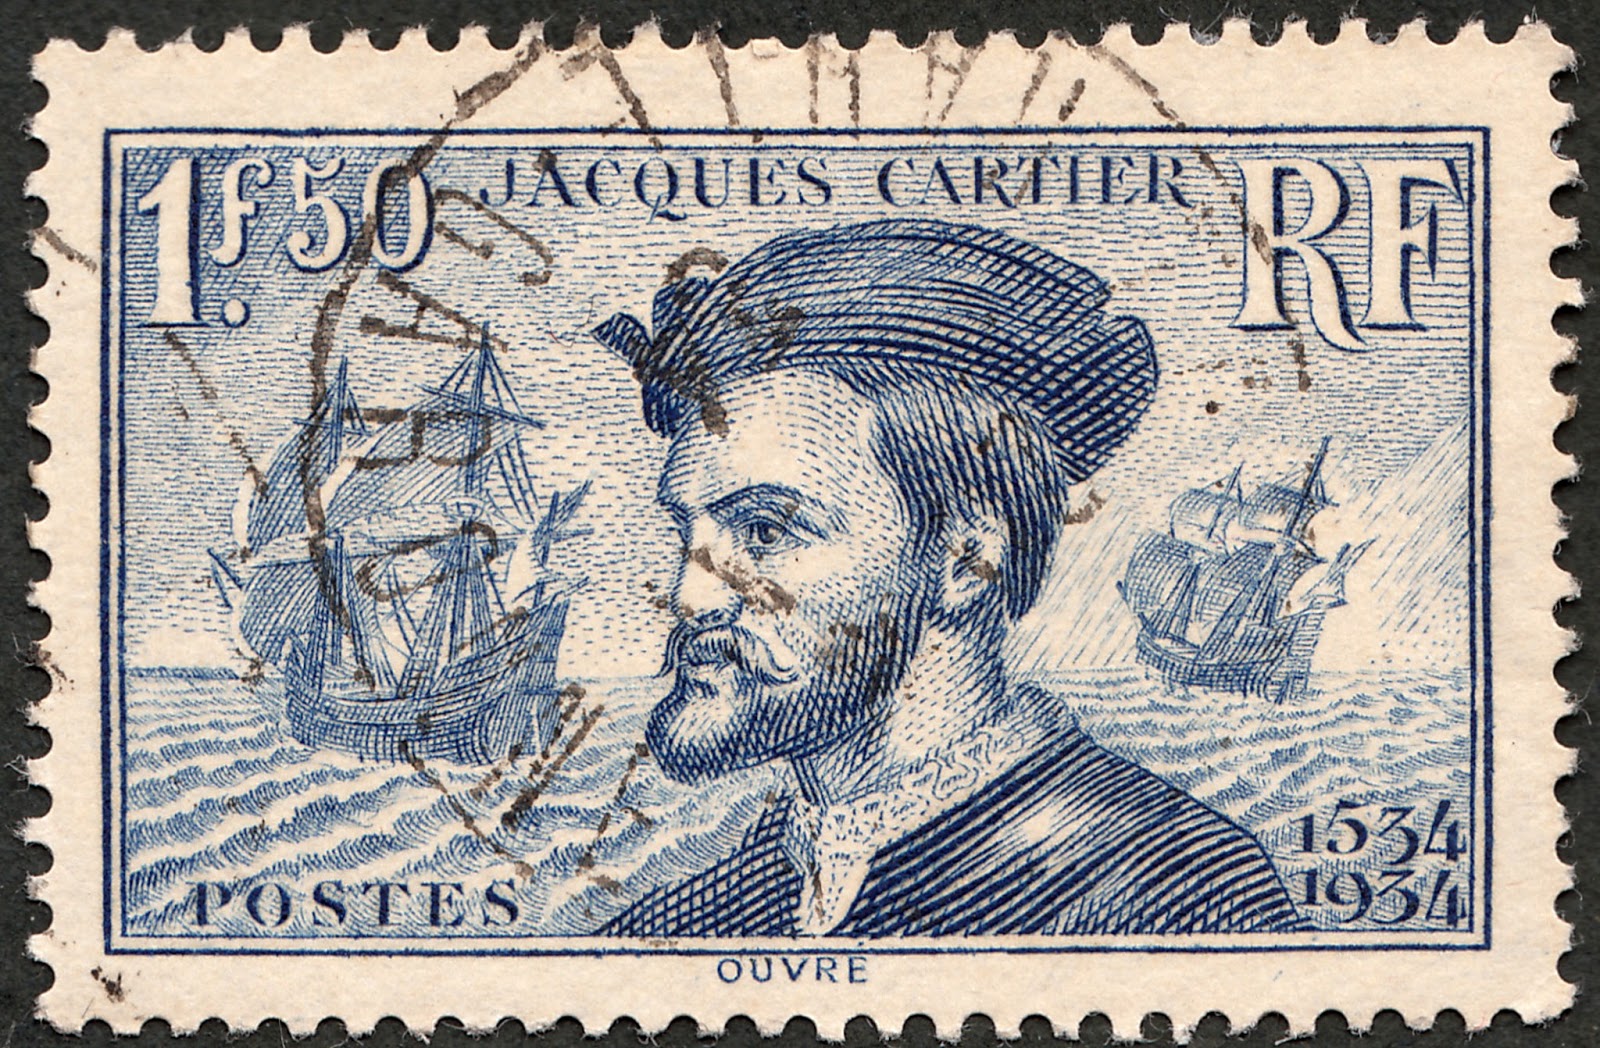 French Stamp Engravers France 1934 Jacques Cartier